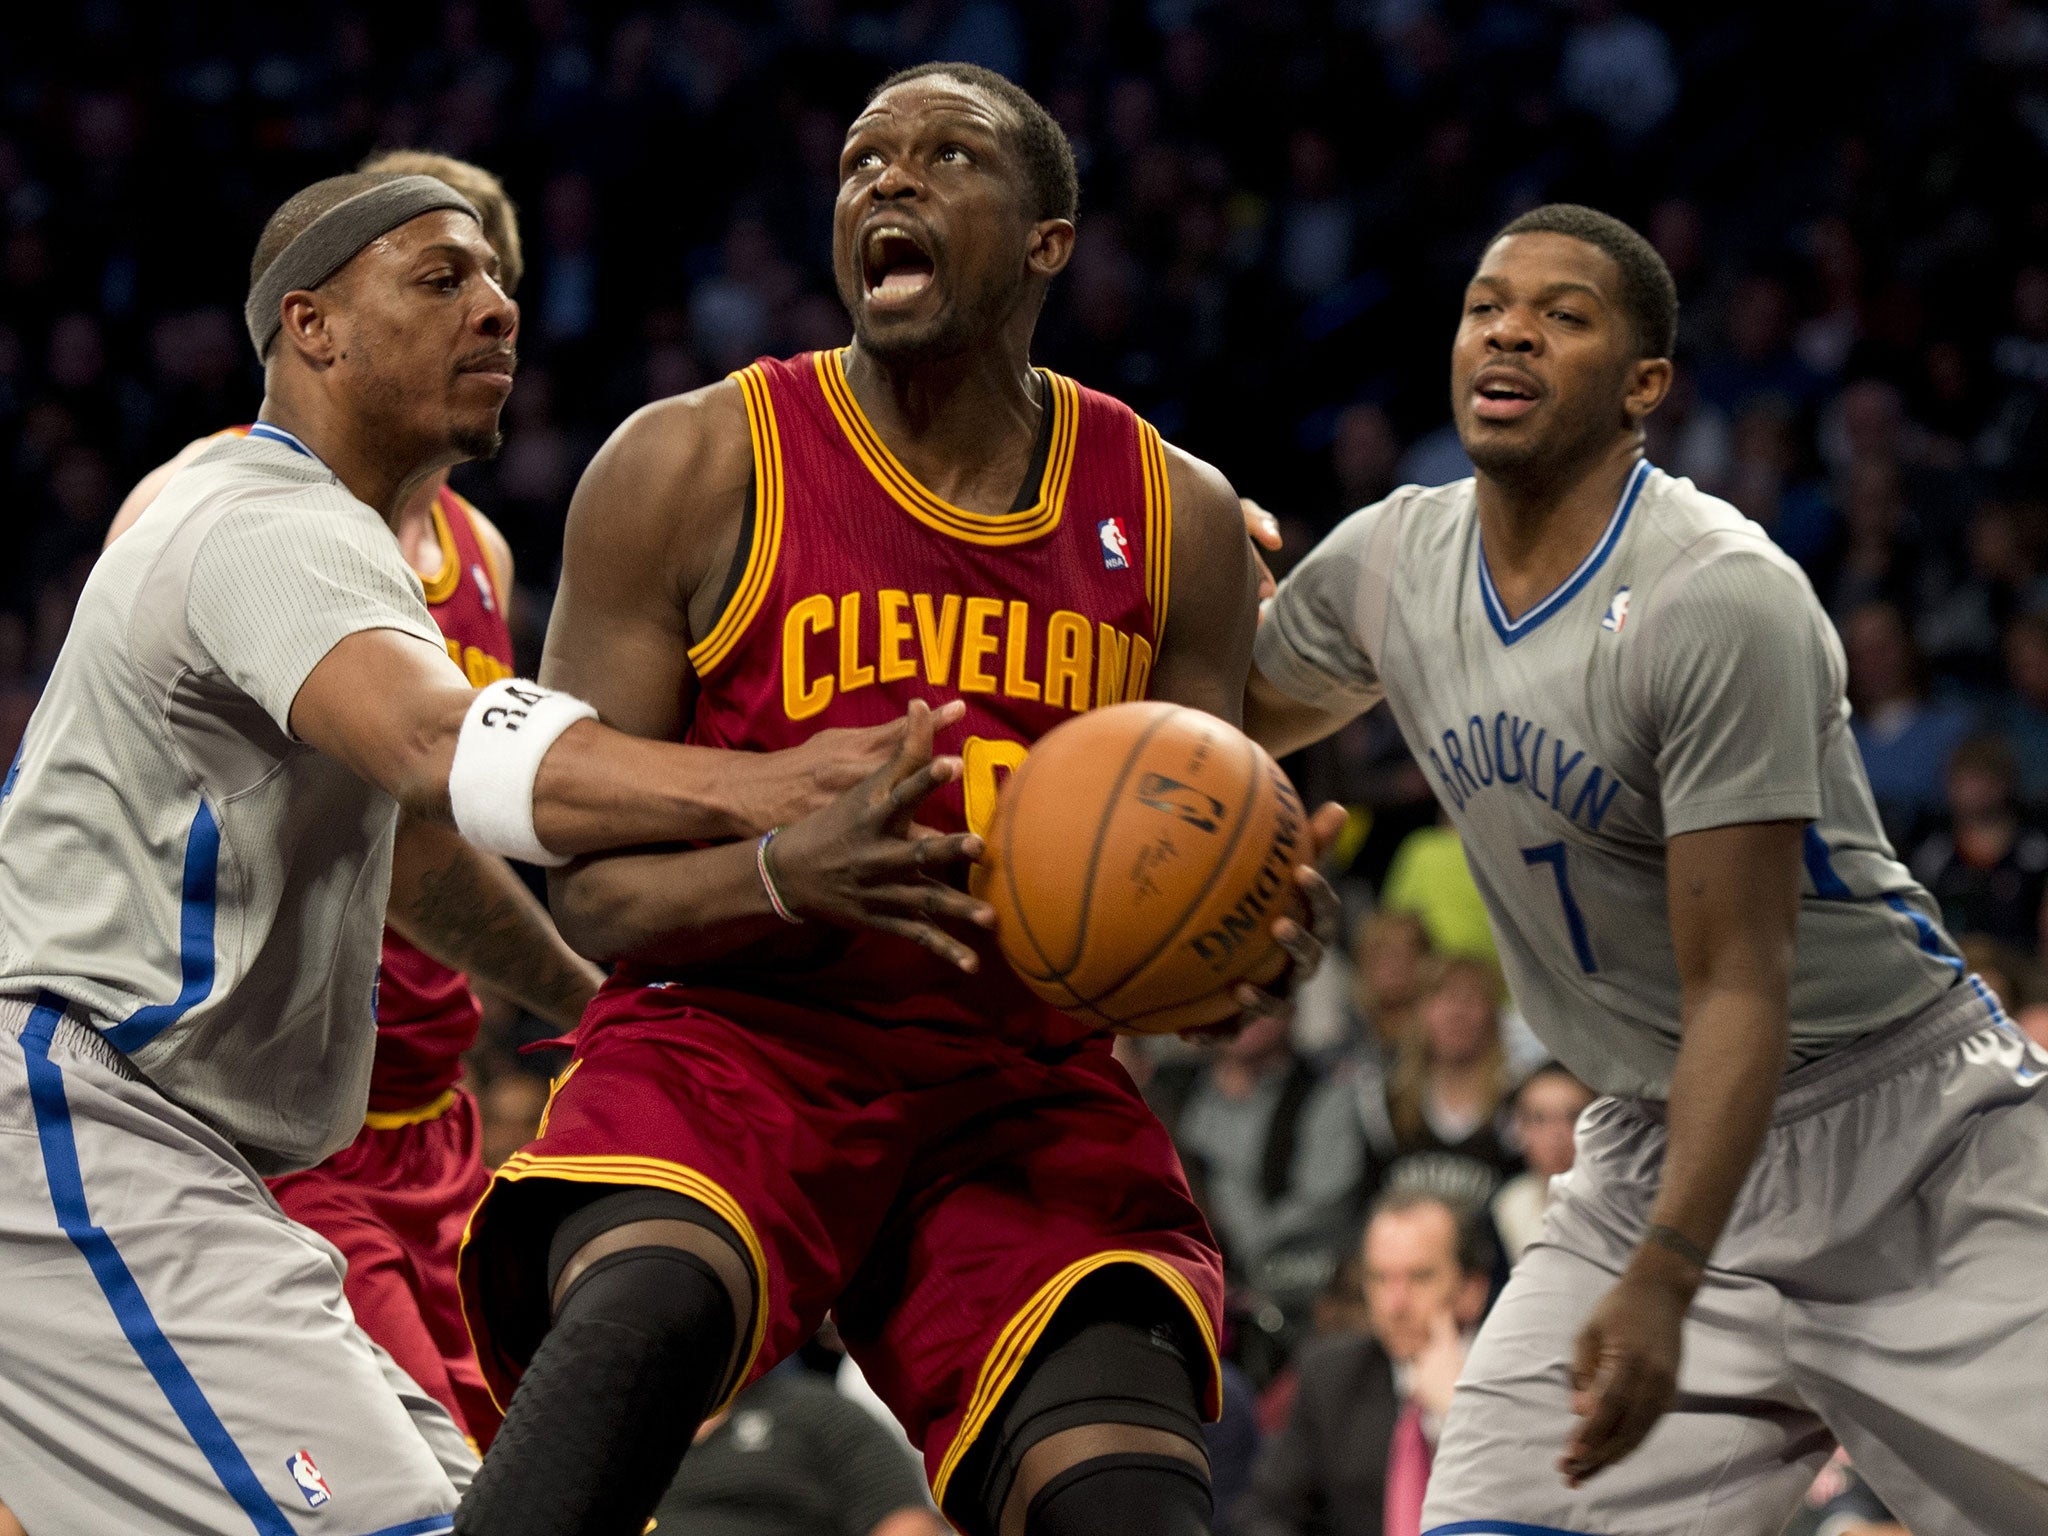 Cleveland Cavaliers Luol Deng (C) drives between Brooklyn Nets Paul Pierce and Joe Johnson during their NBA game March 28, 2014 at the Barclay Center in New York.